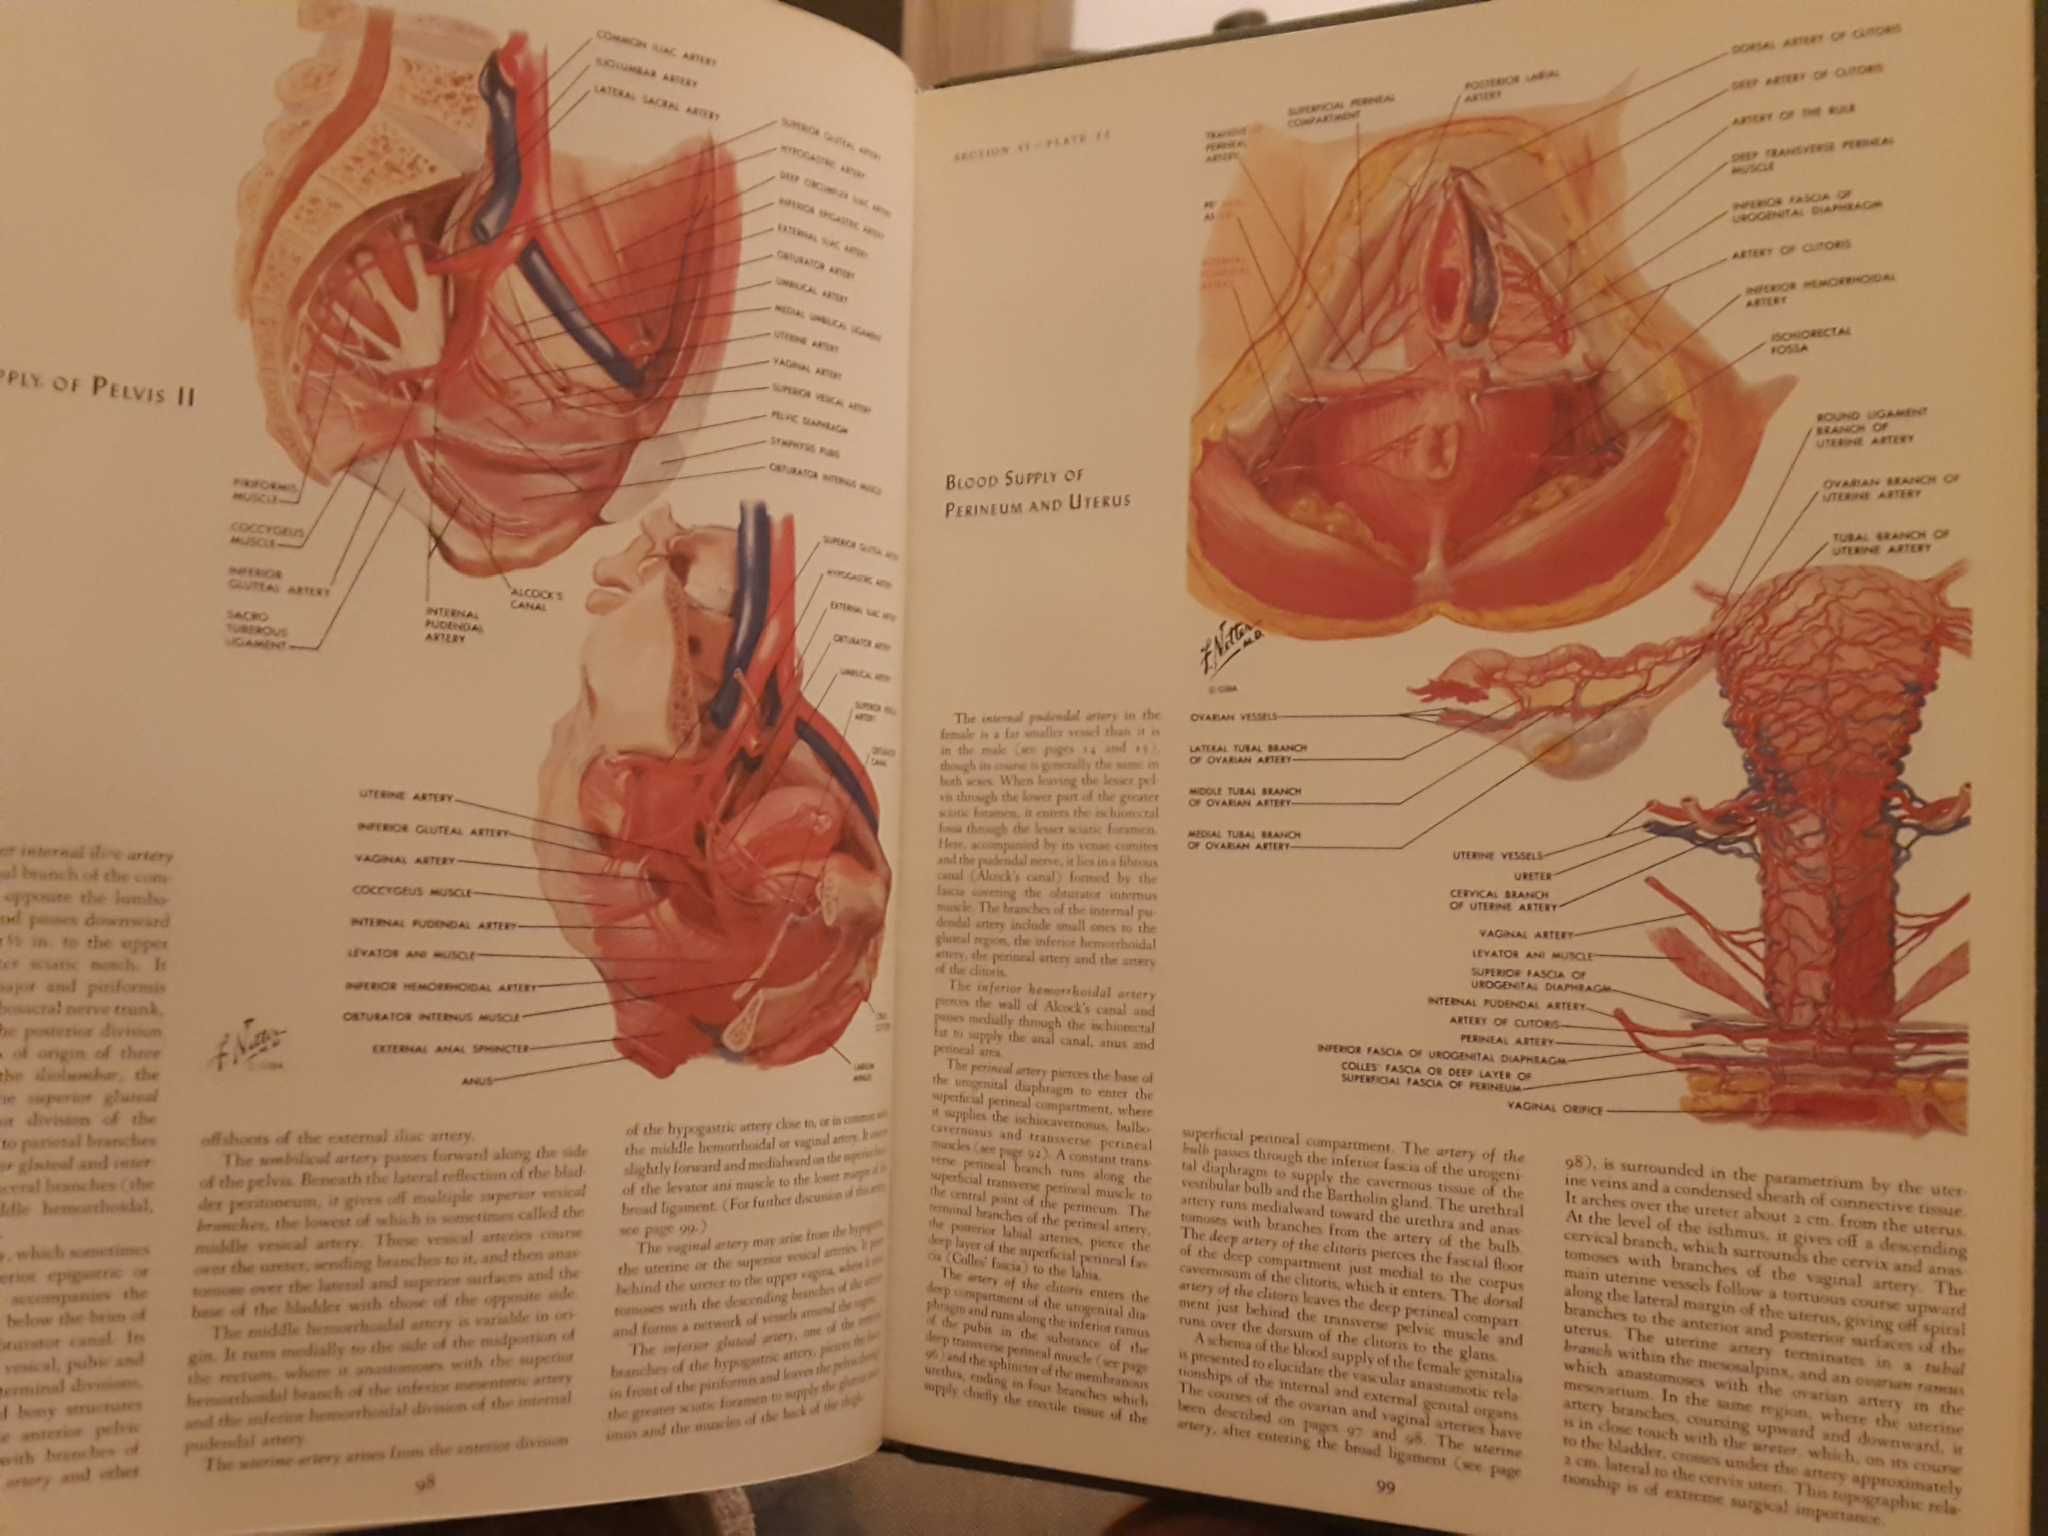 The Ciba Collection of Medical Illustration - 2. Reproductive System